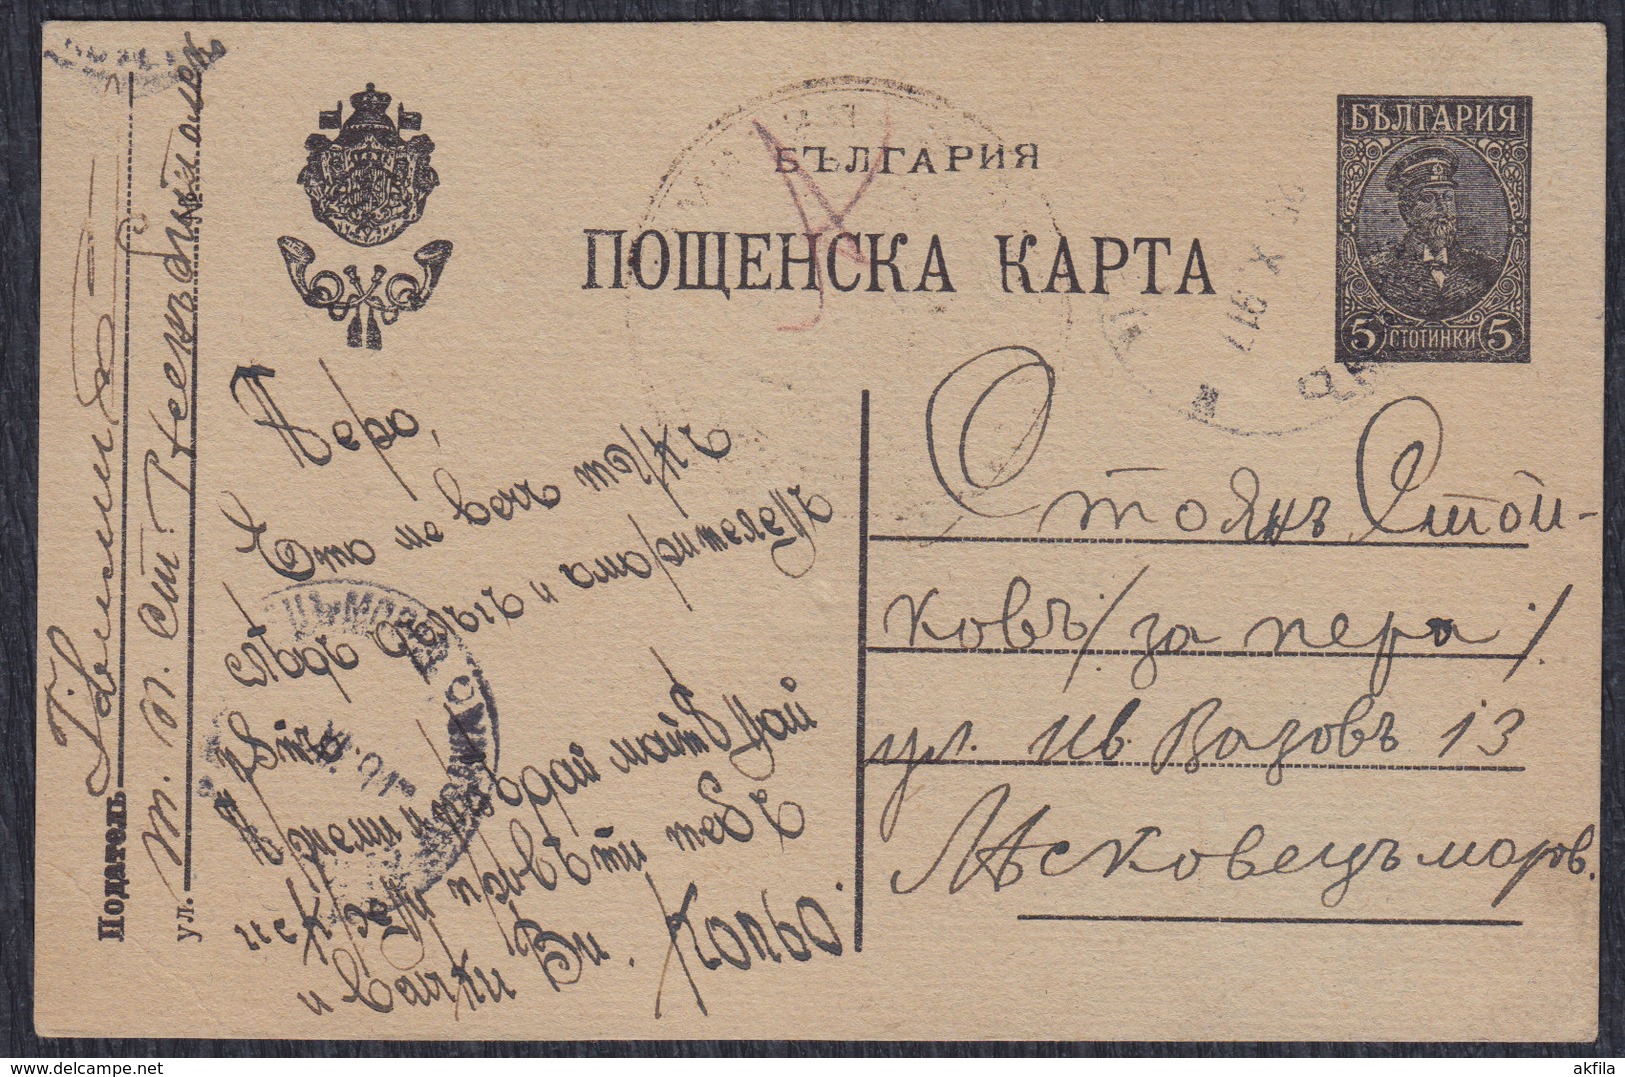 WWI Bulgaria Occupation Of Serbia 1917 Censored Postal Stationery Sent To Leskovac - Guerre